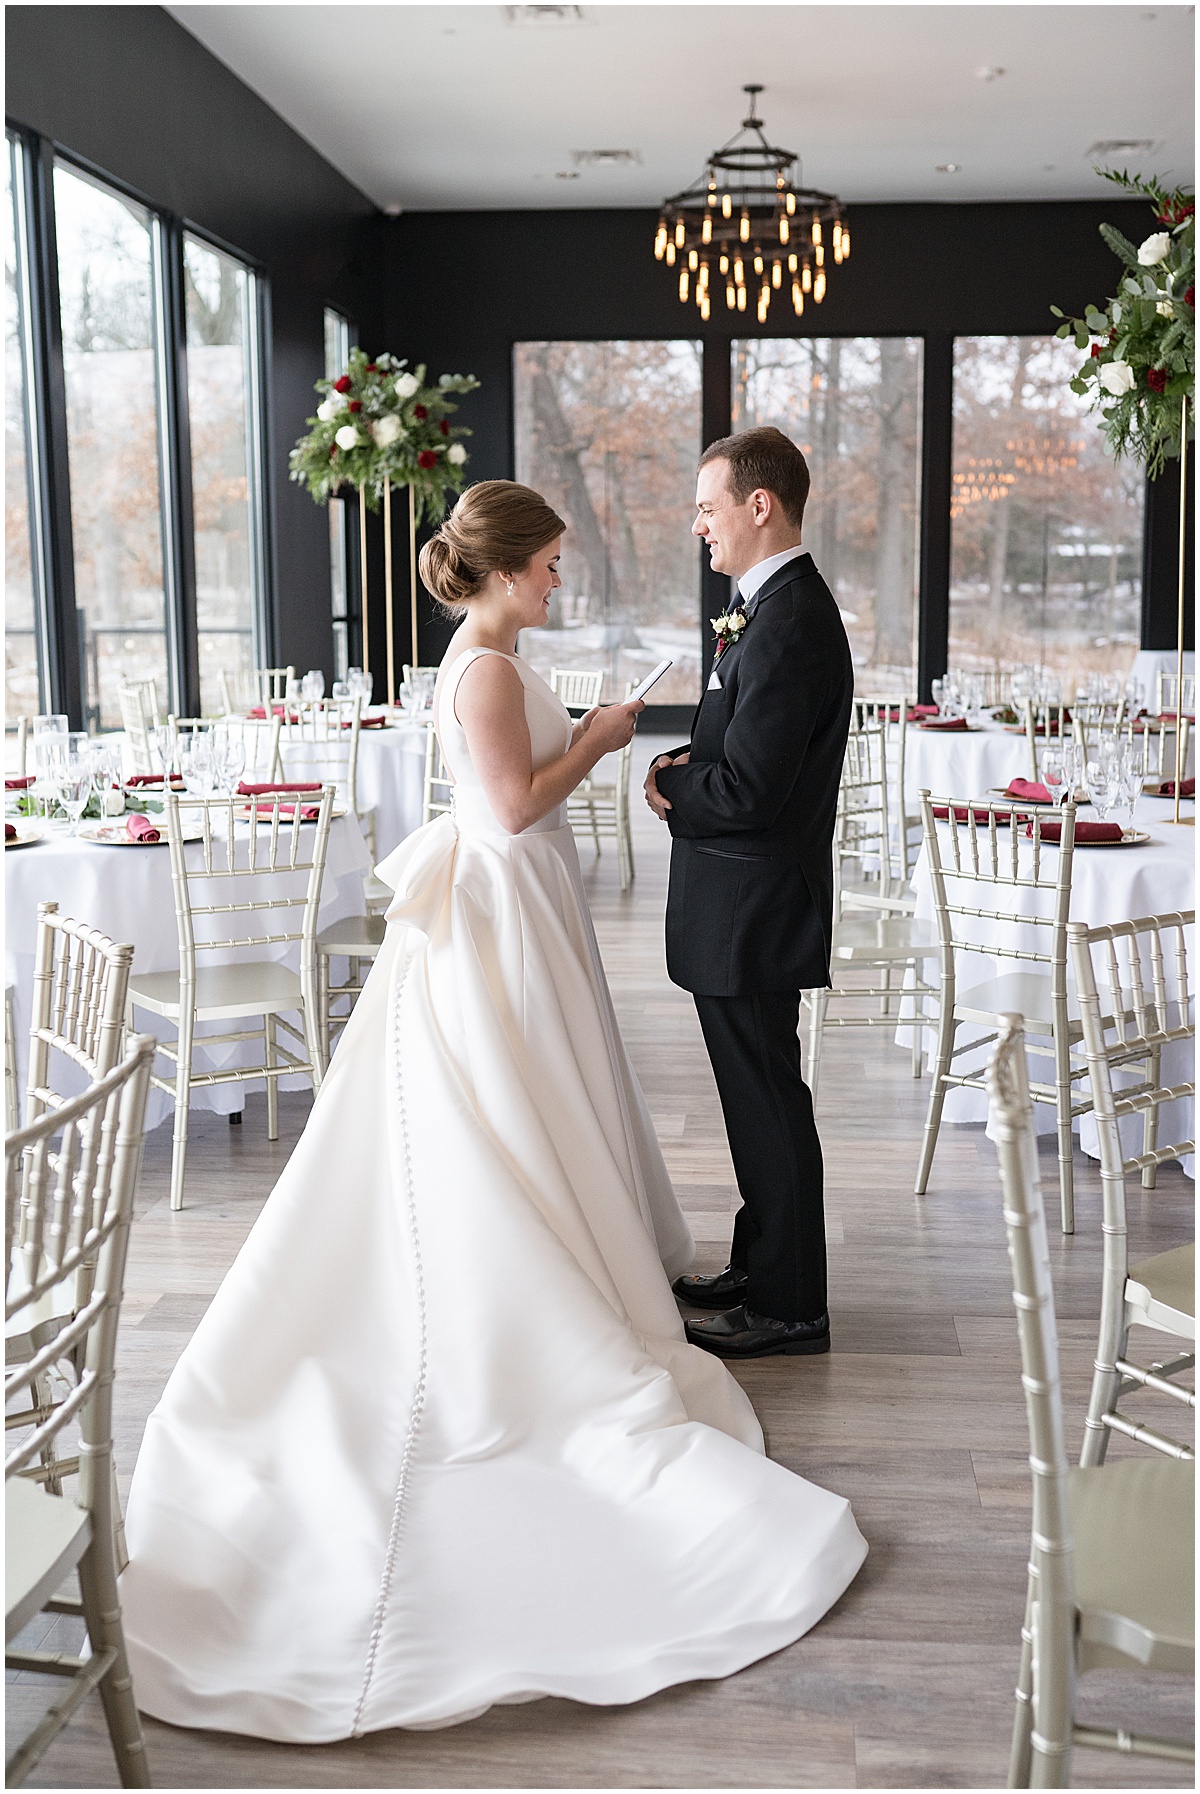 Bride reads private vows to groom at Allure on the Lake wedding in Chesterton, Indiana